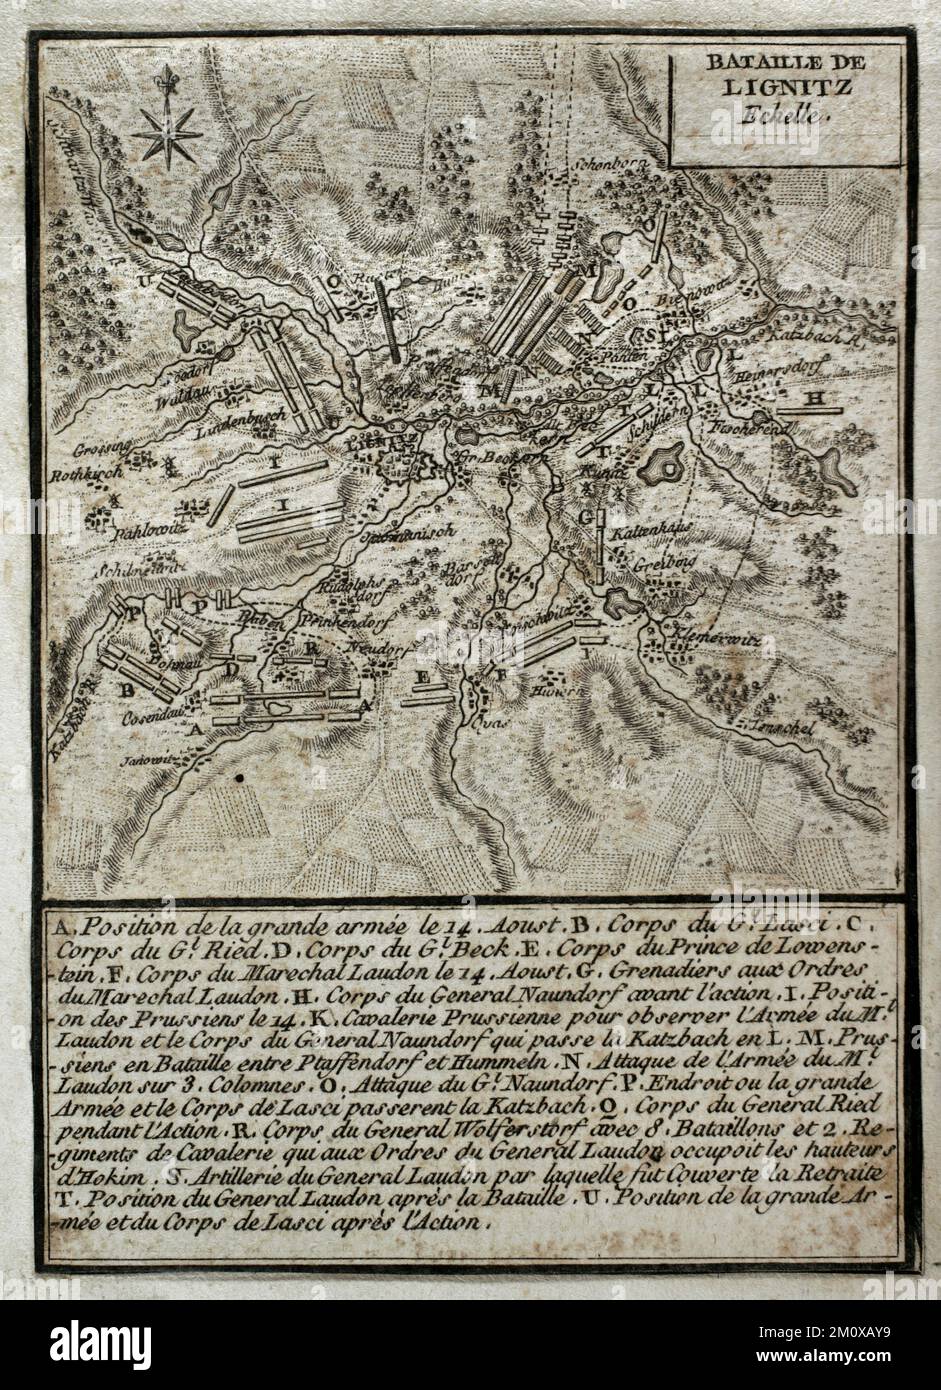 Seven Years War (1756-1763). Third Silesian War. Map of the Battle of Liegnitz (August 15, 1760). It took place on the bank of the Katzbach River in Northern Silesia. An Imperial Austrian army, commanded by Marshal Daun, faced against the Prussian army led by Frederick the Great. The Austrians were defeated by the Prussians. Published in 1765 by the cartographer Jean de Beaurain (1696-1771) as an illustration of his Great Map of Germany, with the events that took place during the Seven Years War. French edition, 1765. Military Historical Library of Barcelona (Biblioteca Histórico Militar de Ba Stock Photo